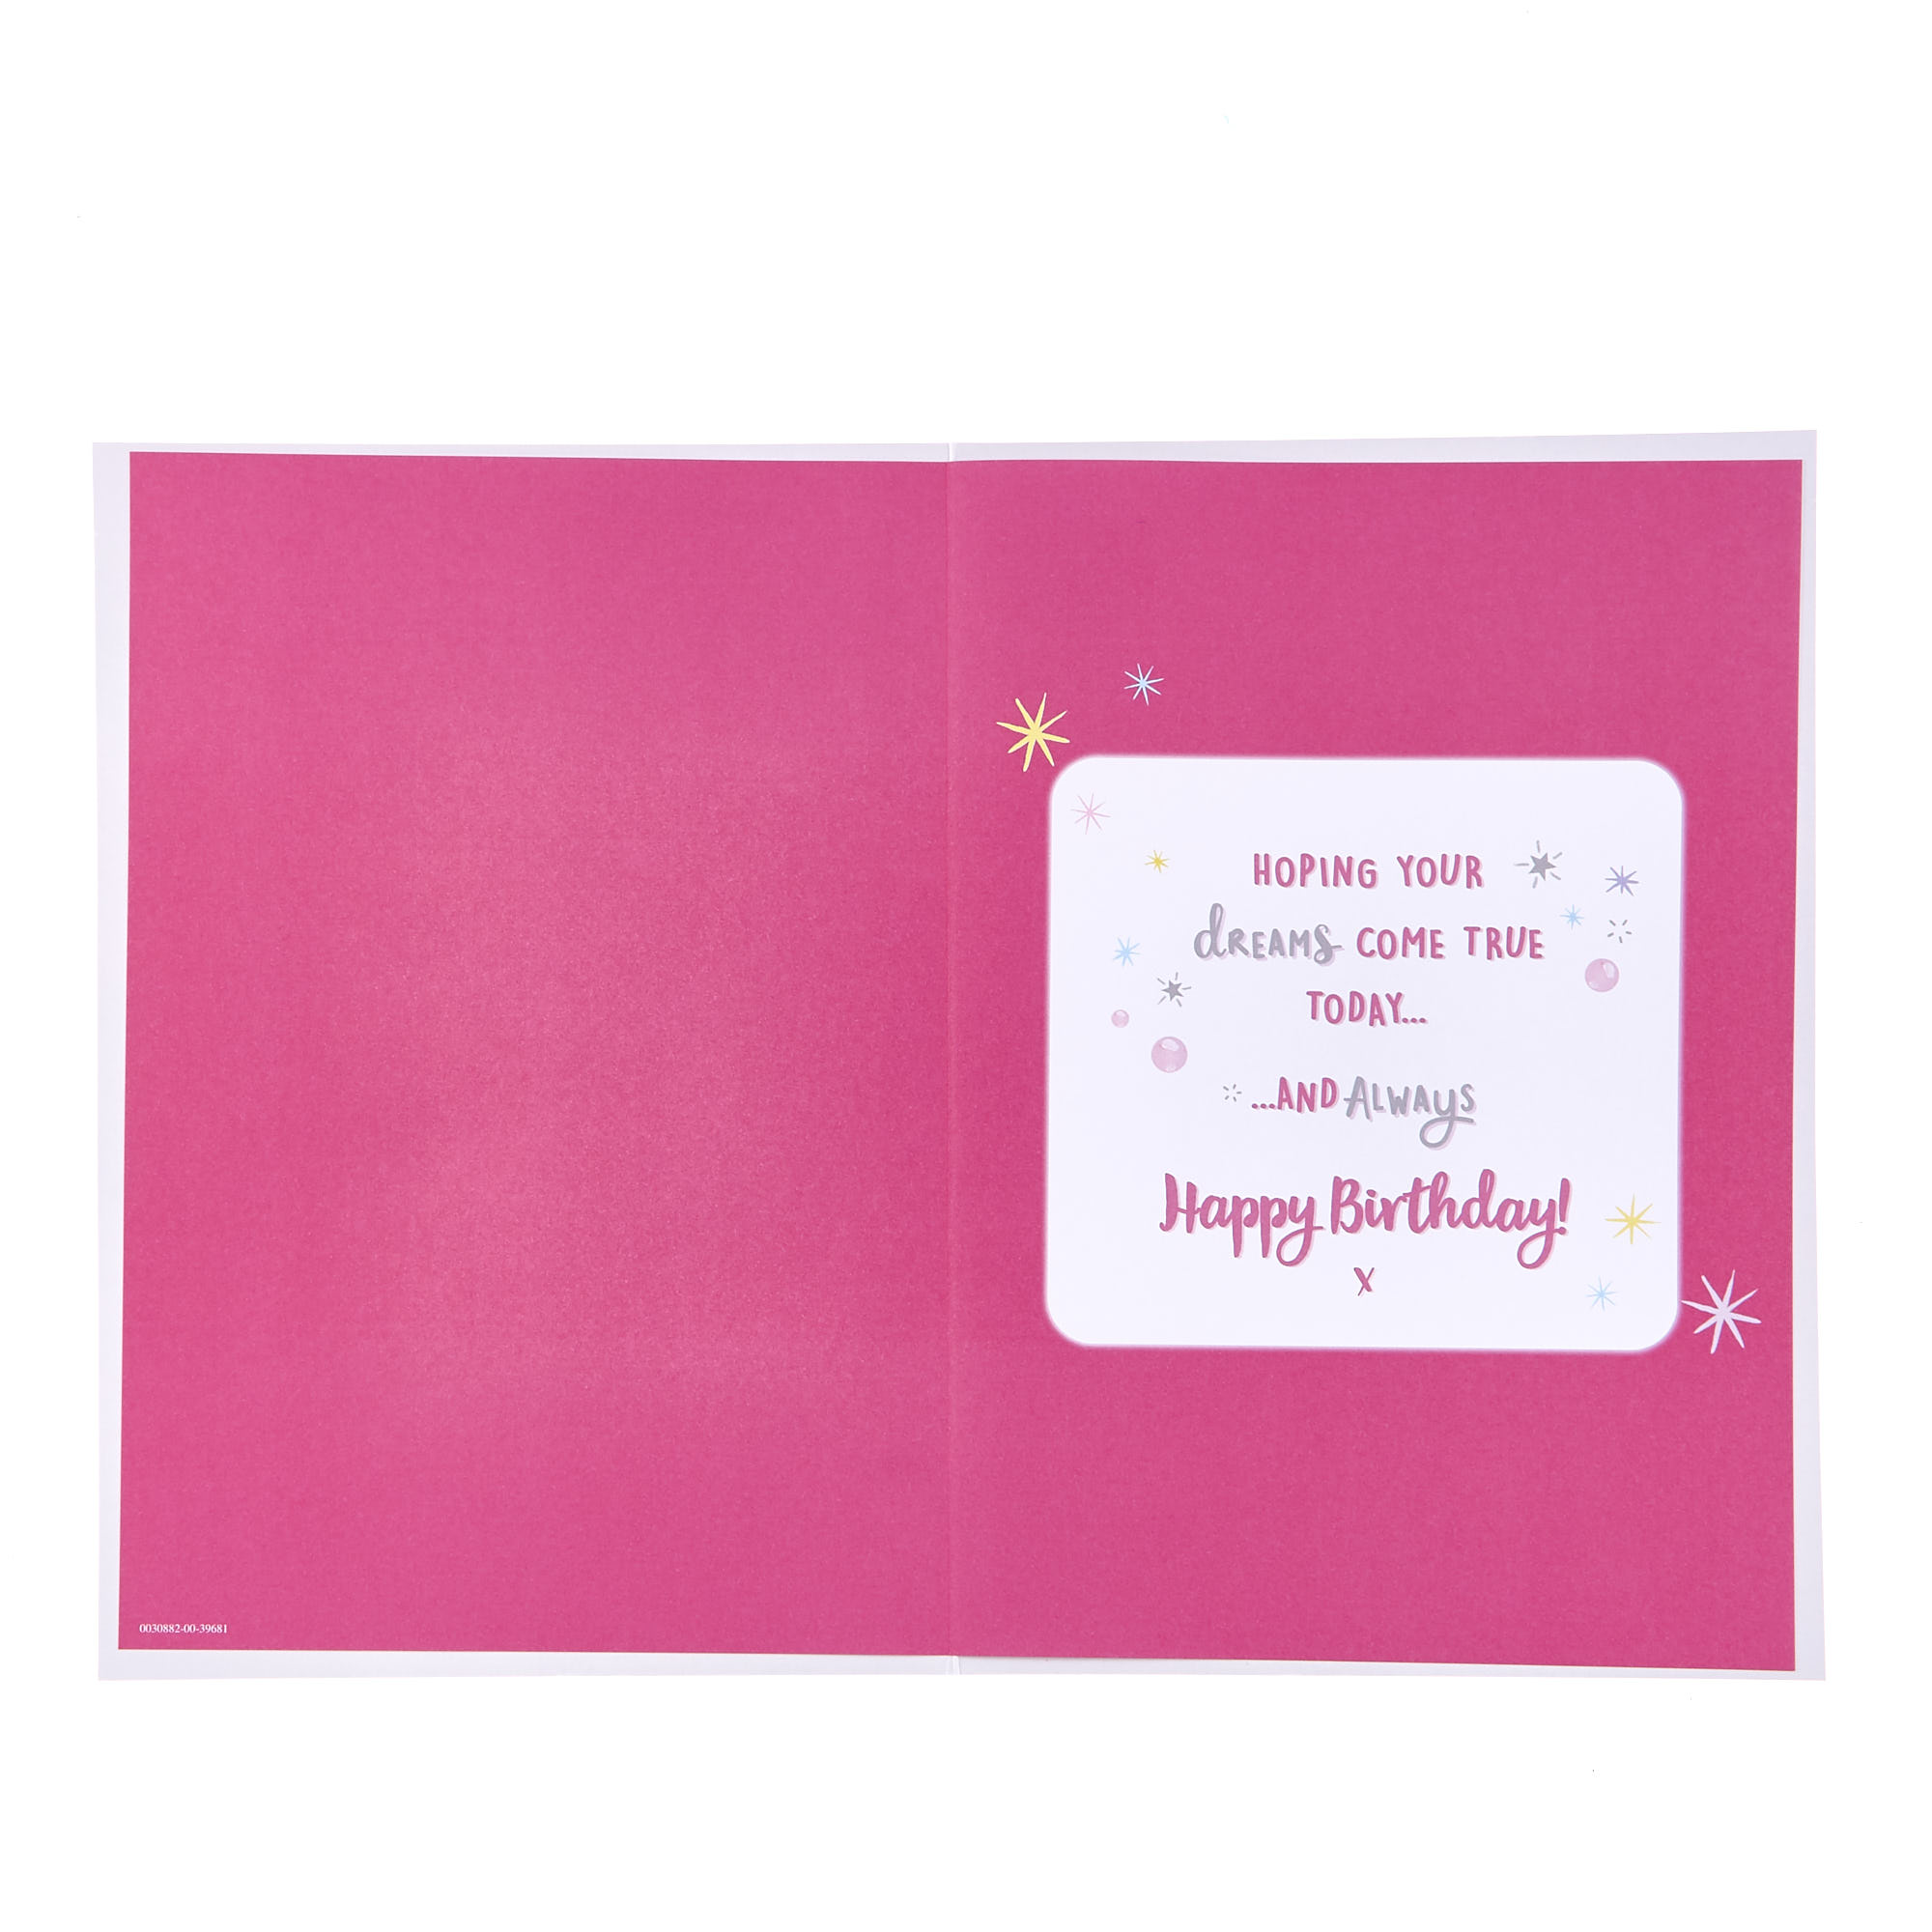 Buy Birthday Card - Awesome Granddaughter for GBP 1.29 | Card Factory UK